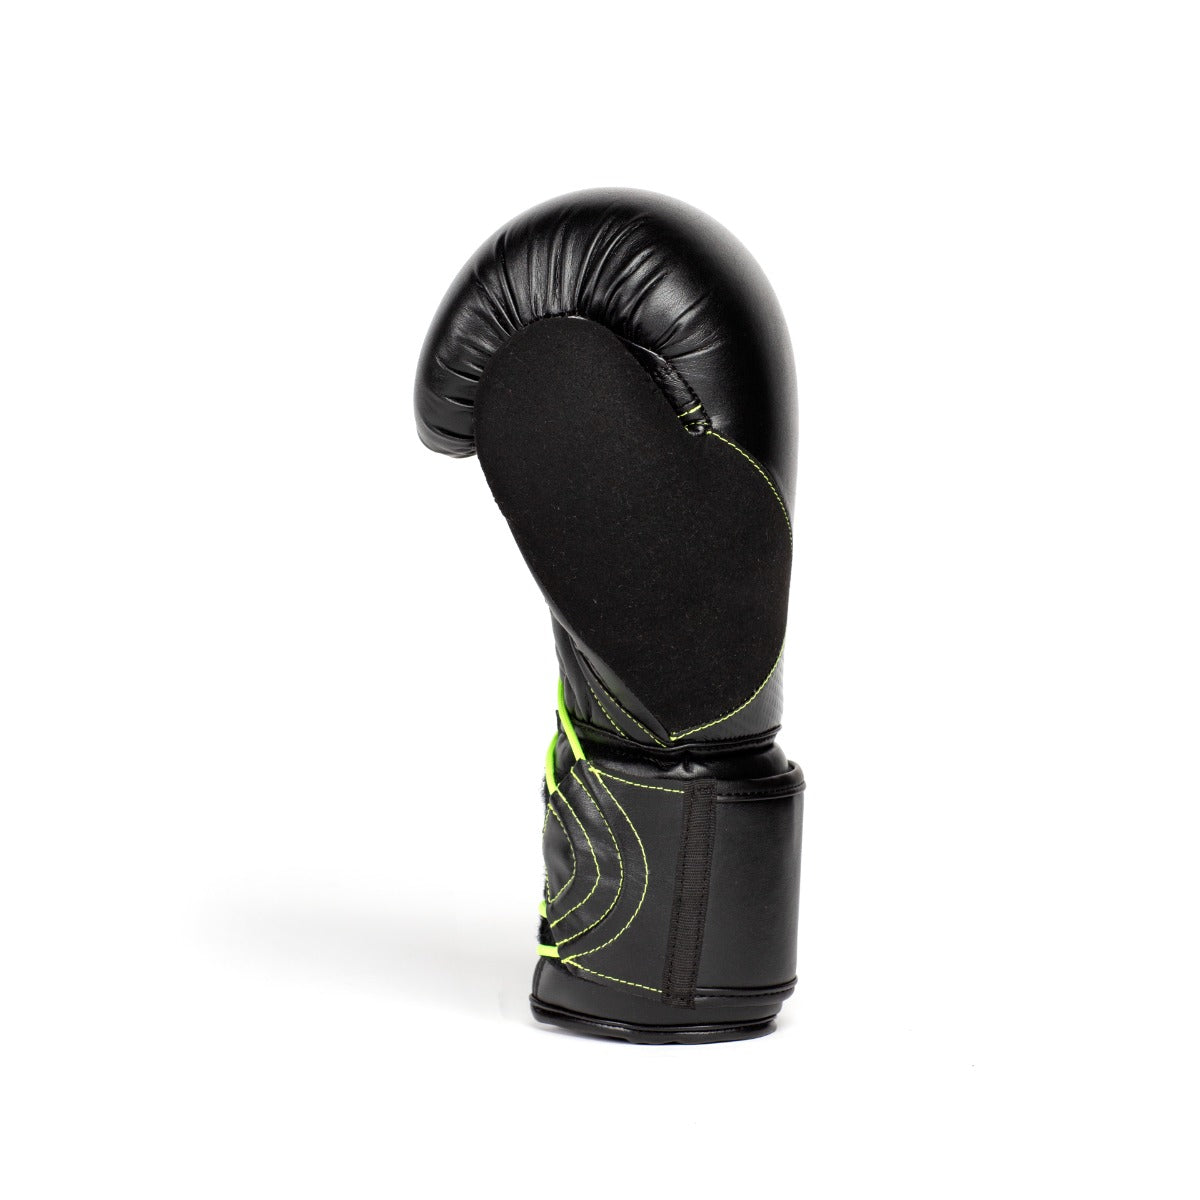 Protex Boxing Gloves - Everlast